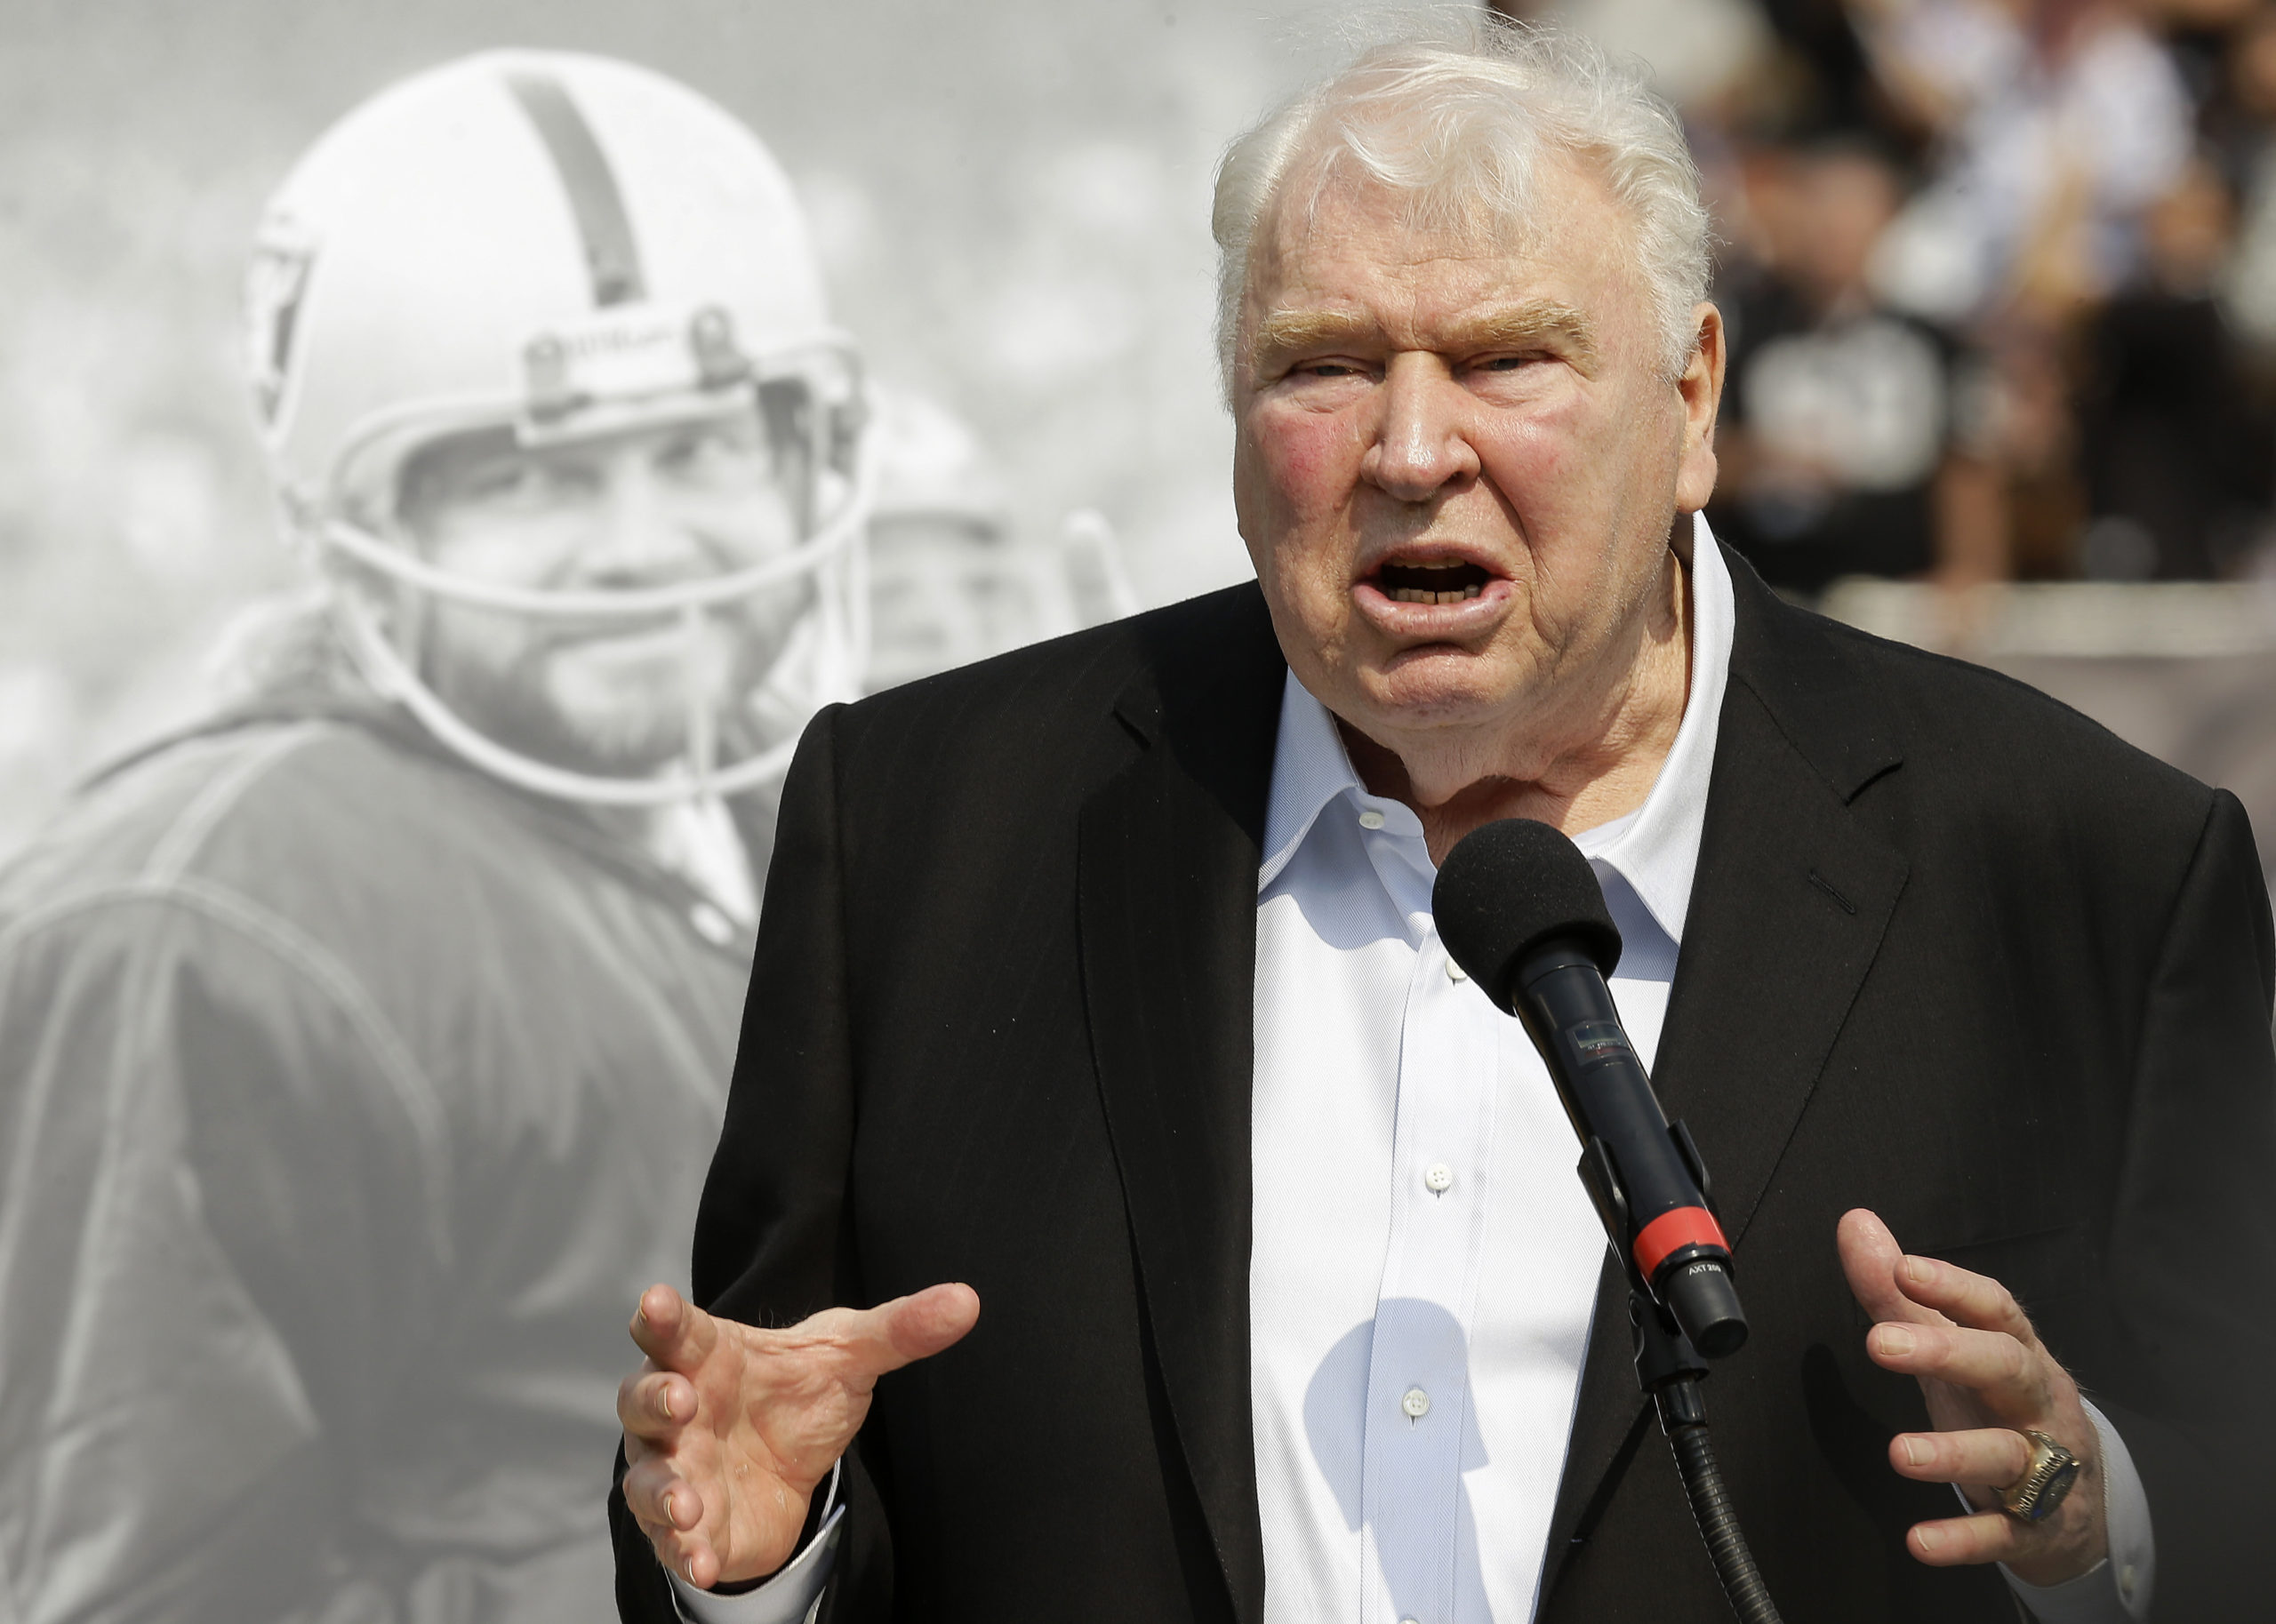 Former Oakland Raiders head coach John Madden speaks about former quarterback Ken Stabler, pictured at rear, at a ceremony honoring Stabler during halftime of an NFL football game between the Raiders and the Cincinnati Bengals in Oakland, California, on Sept. 13, 2015.